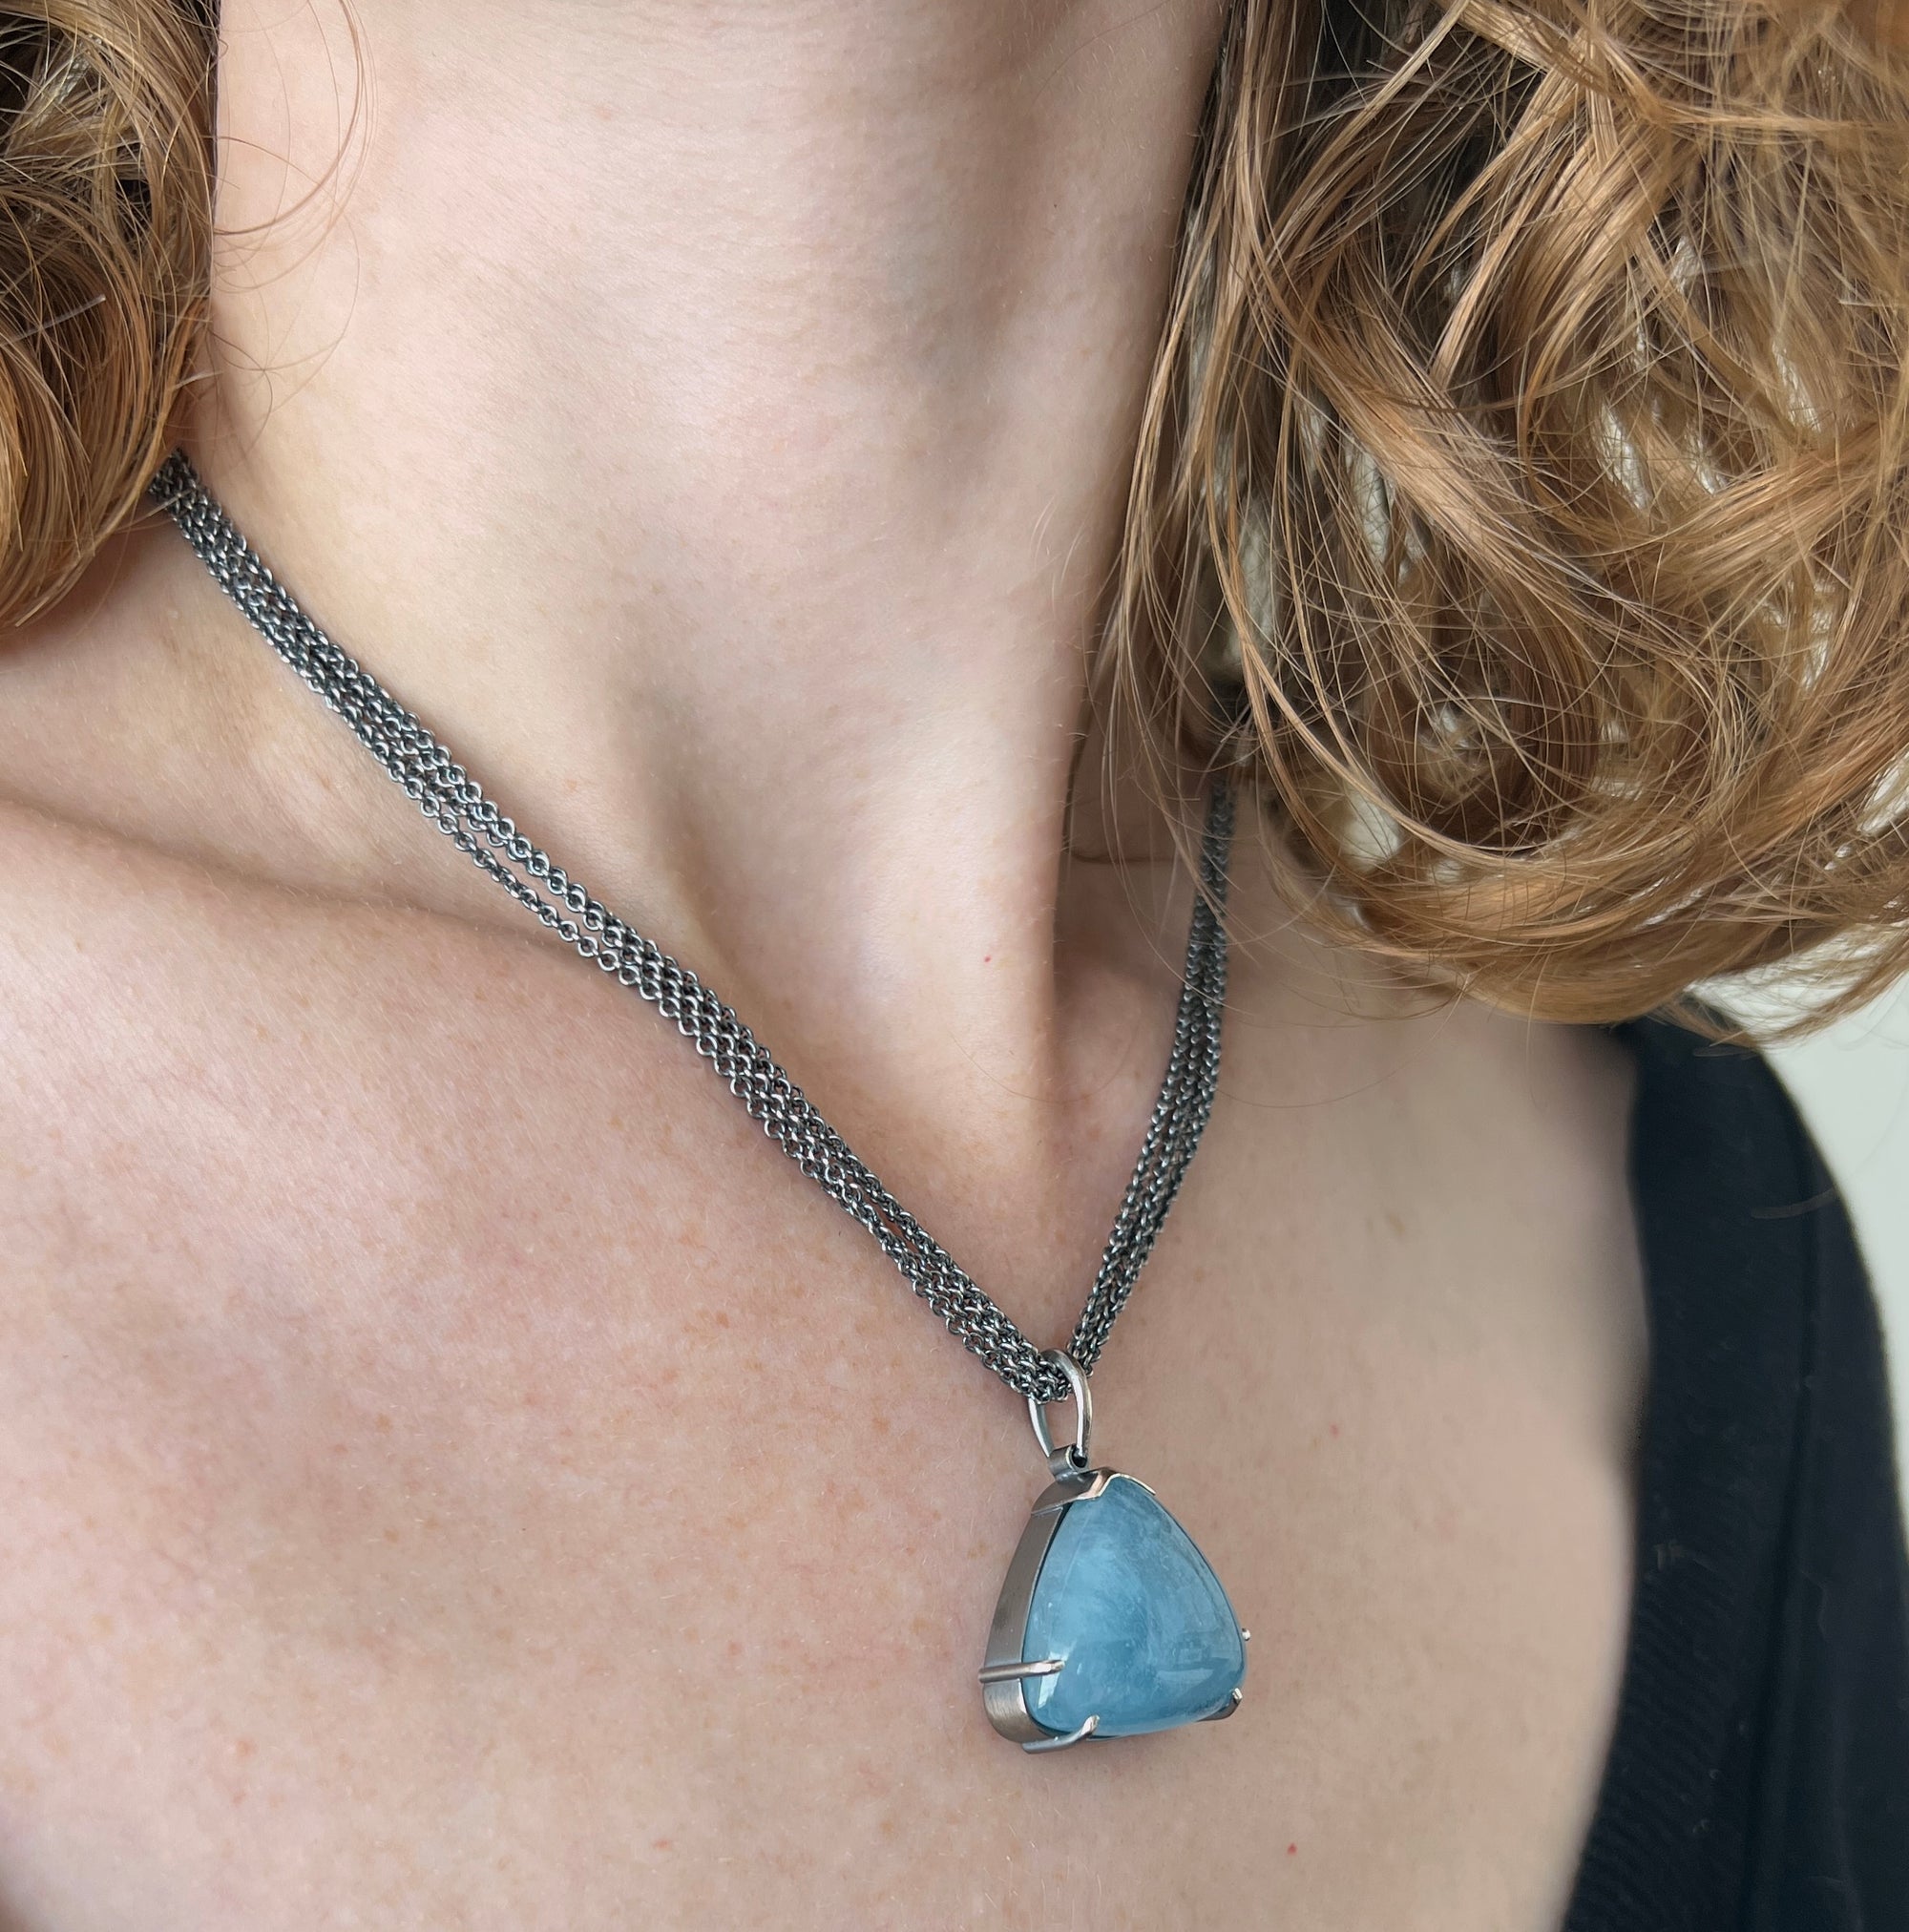 Necklace with large triangular aquamarine cabachon on multi sterling chain shown on model made by Ayesha Mayadas